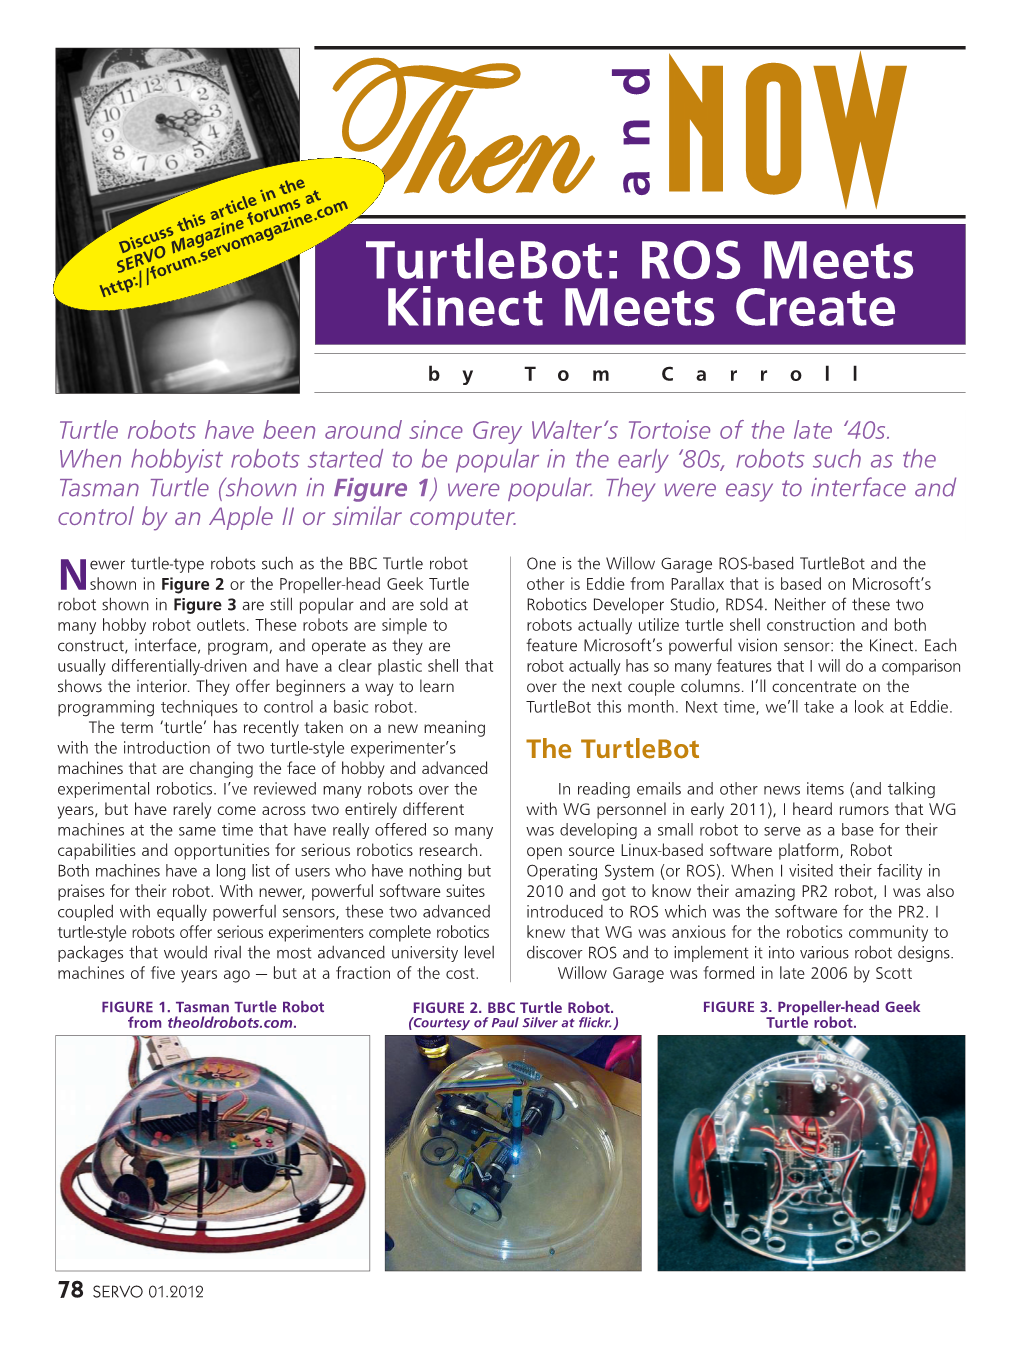 Turtlebot: ROS Meets Kinect Meets Create